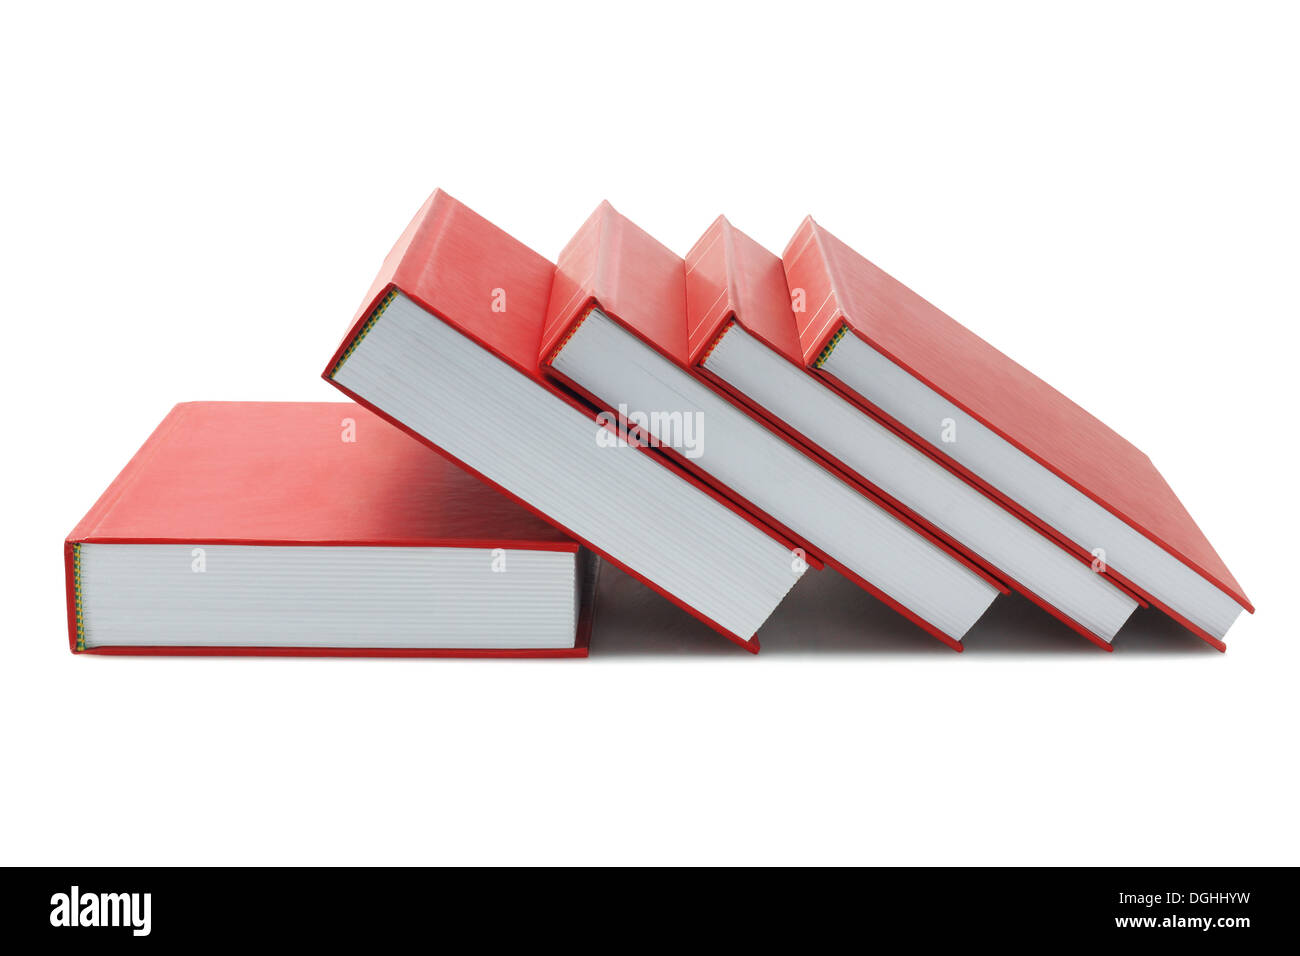 Red Hard Cover Books On White Background Stock Photo